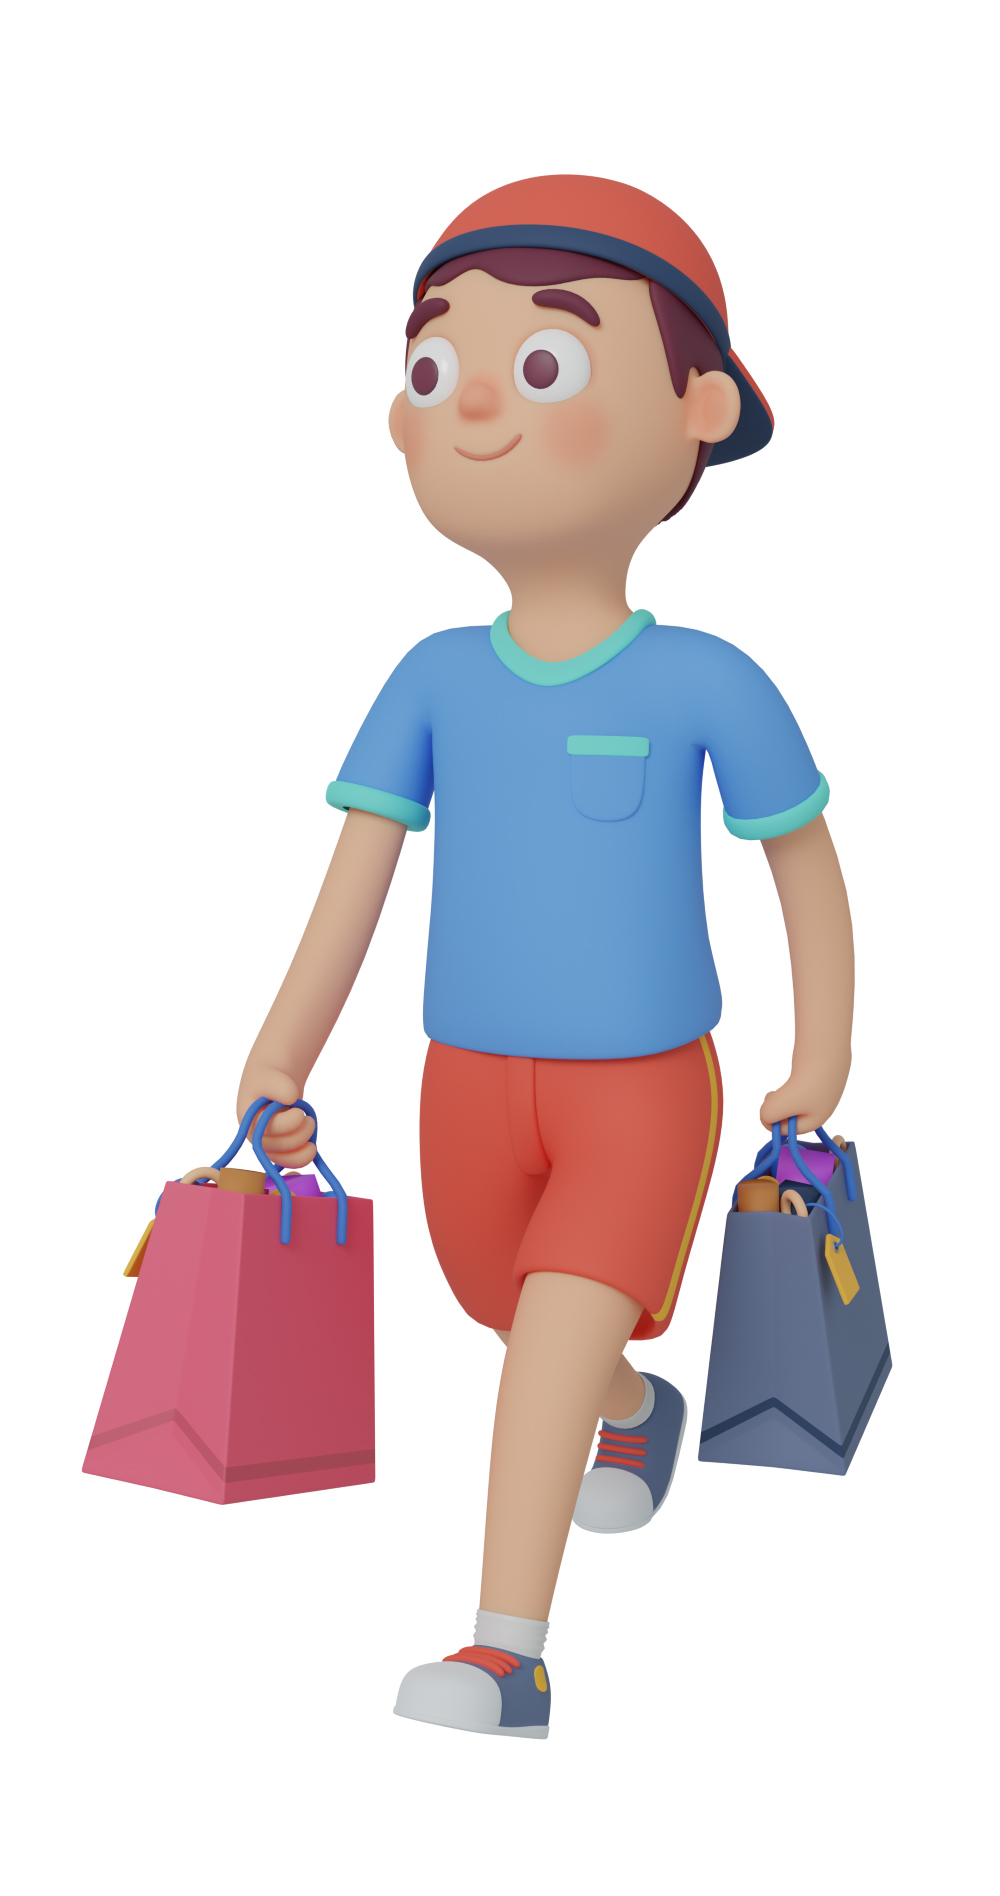 3d character design of a young man walking down a street